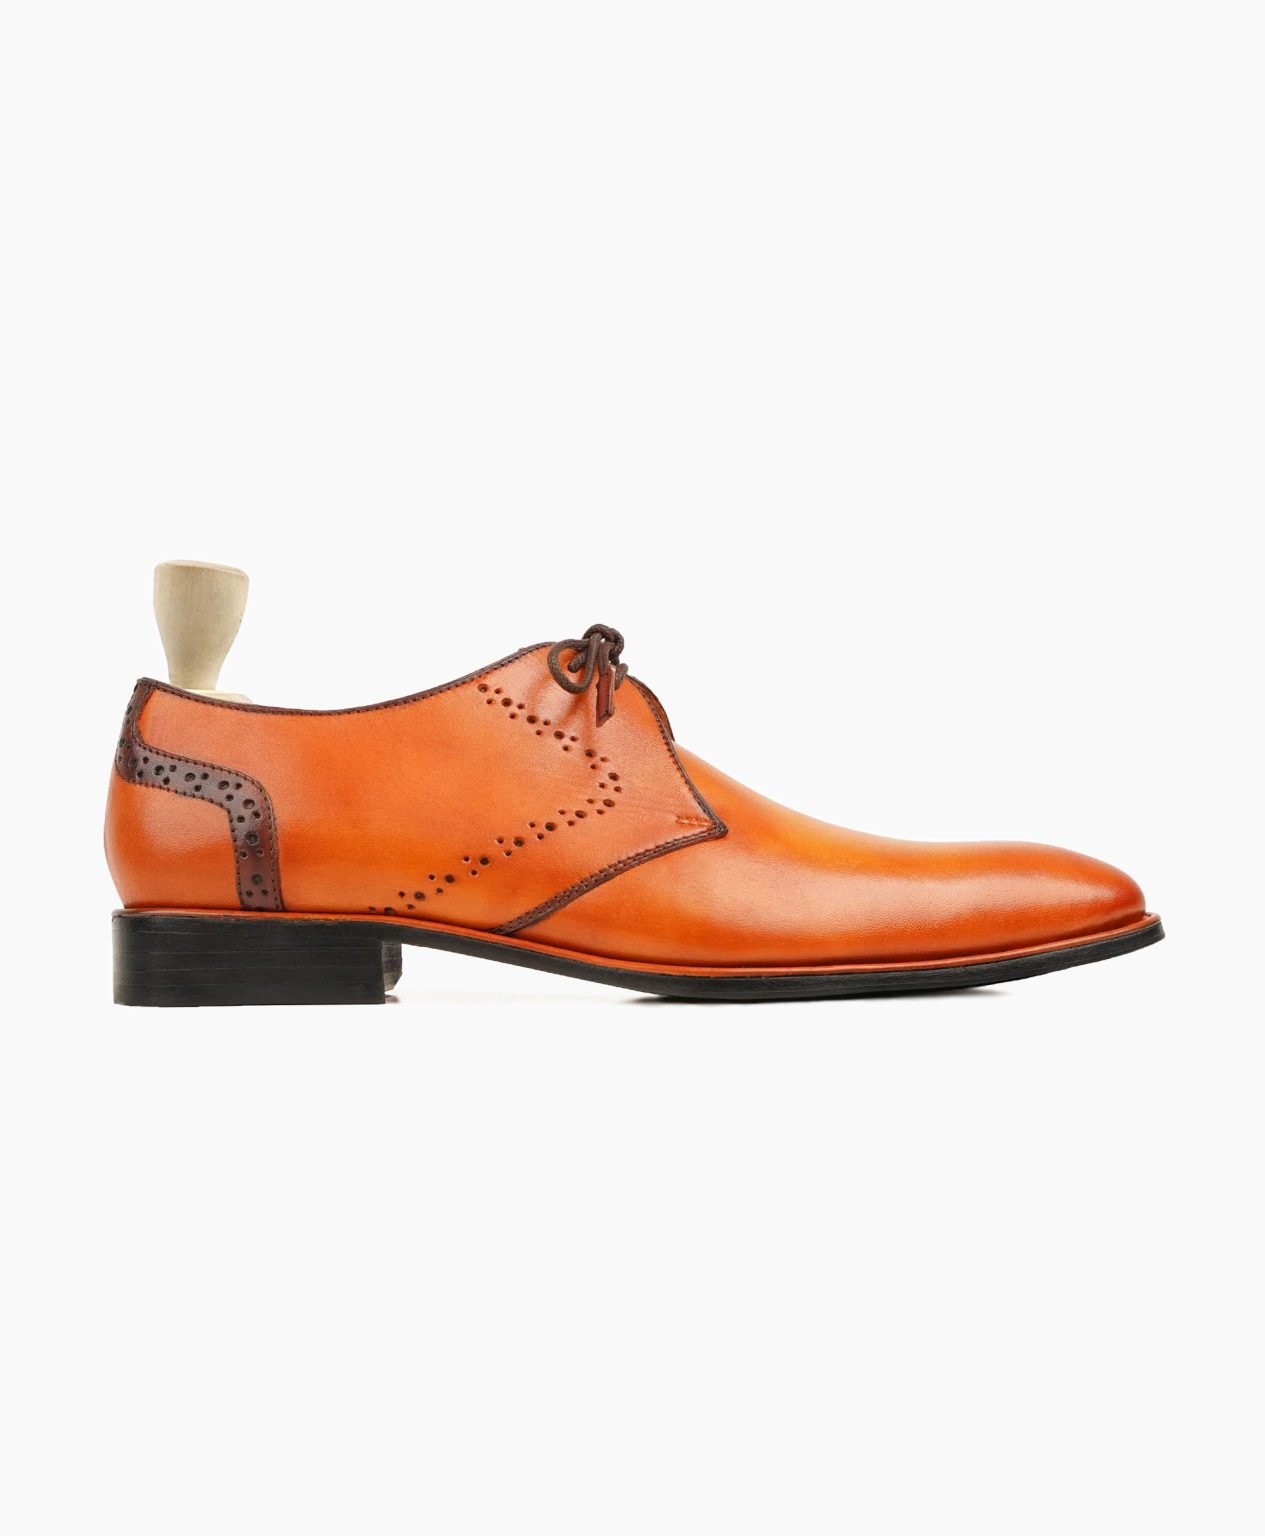 chesterfield-derby-tan-leather-shoes-image201